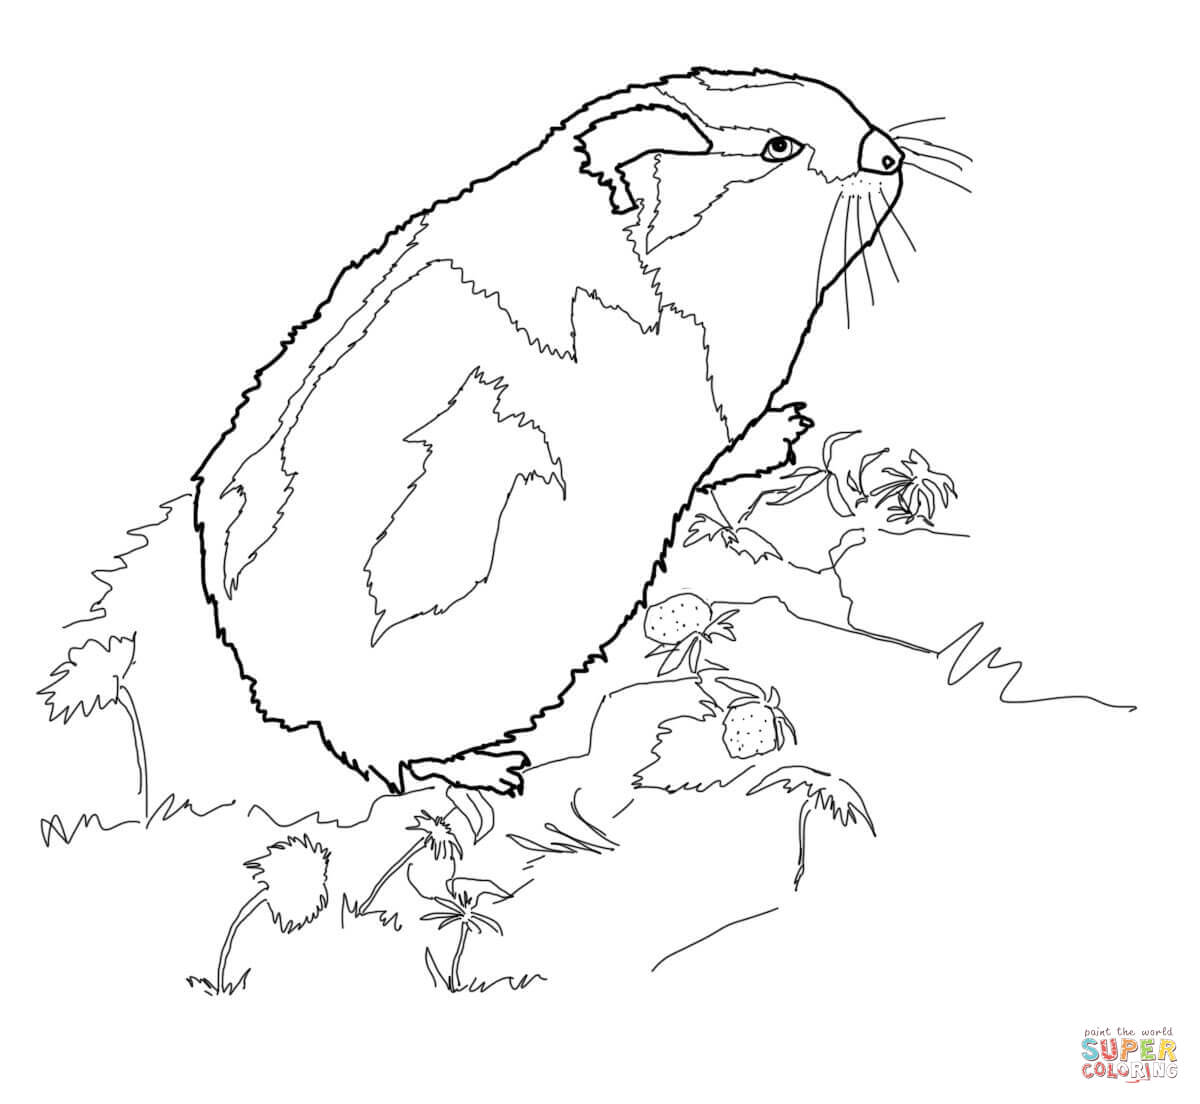 Rodent coloring #3, Download drawings